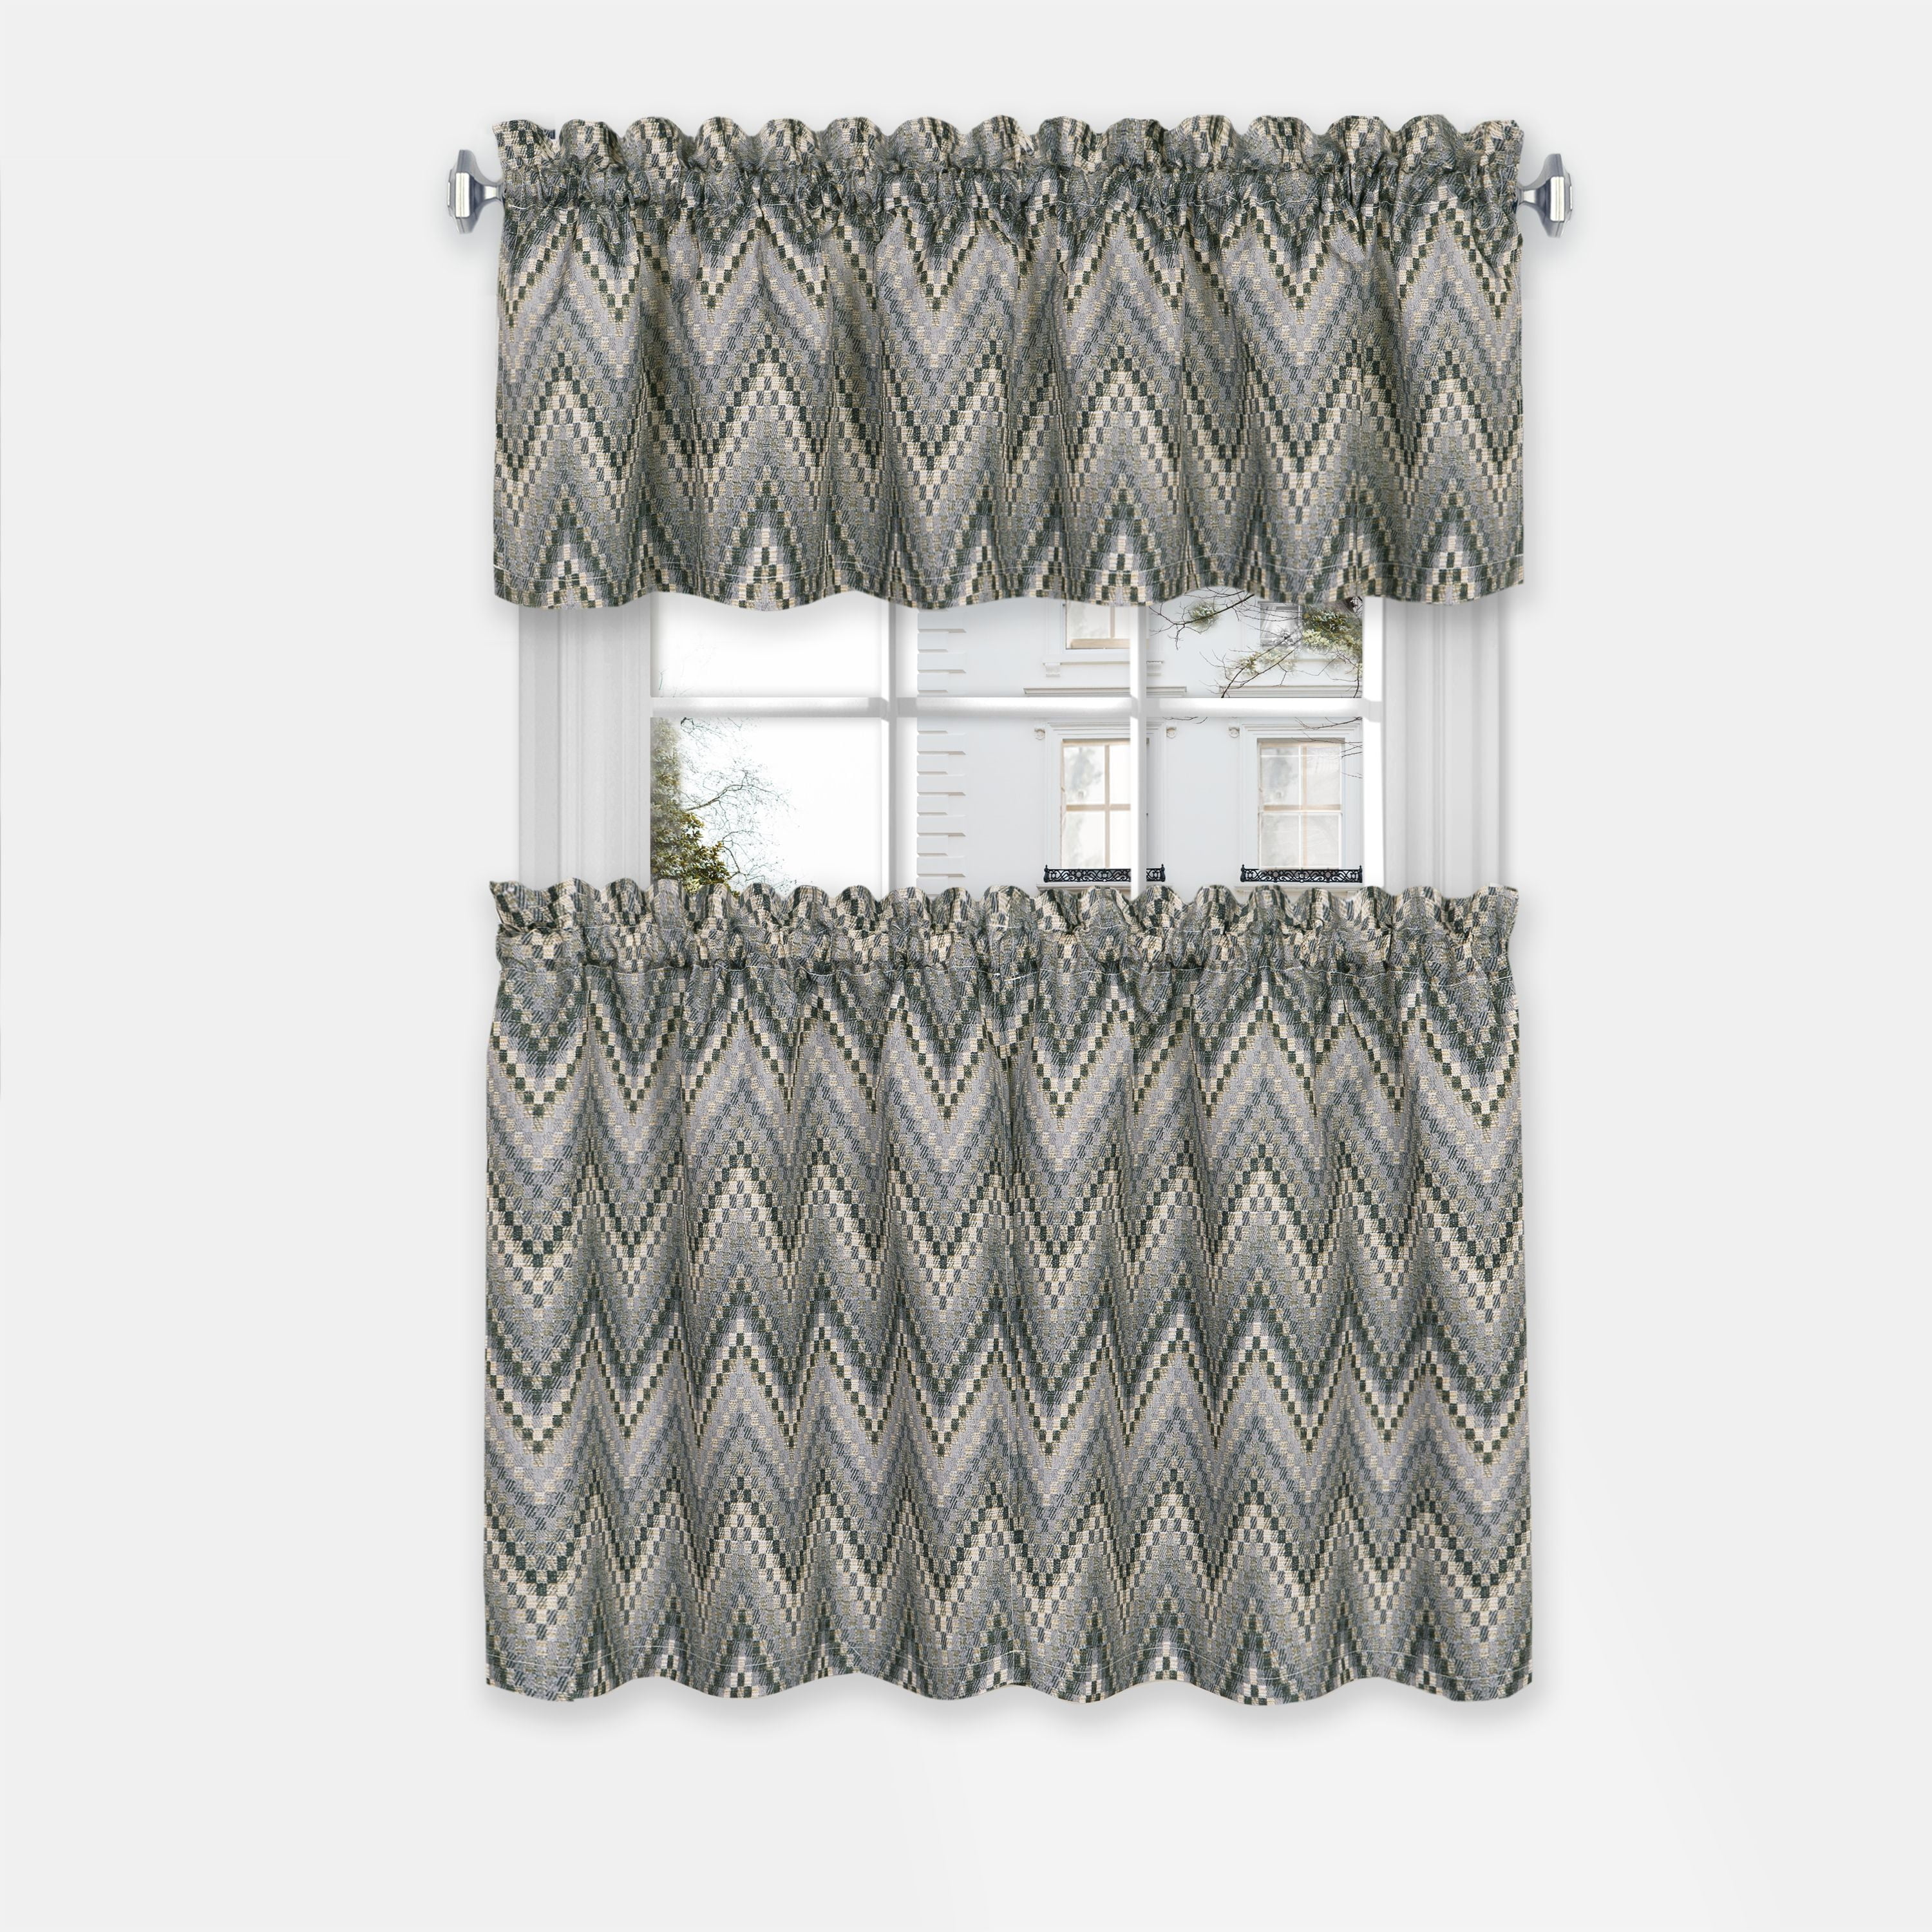 Achim Avtv24cc12 58 X 24 In. Avery Window Curtain Tier & Valance Set, Charcoal - Pack Of 2